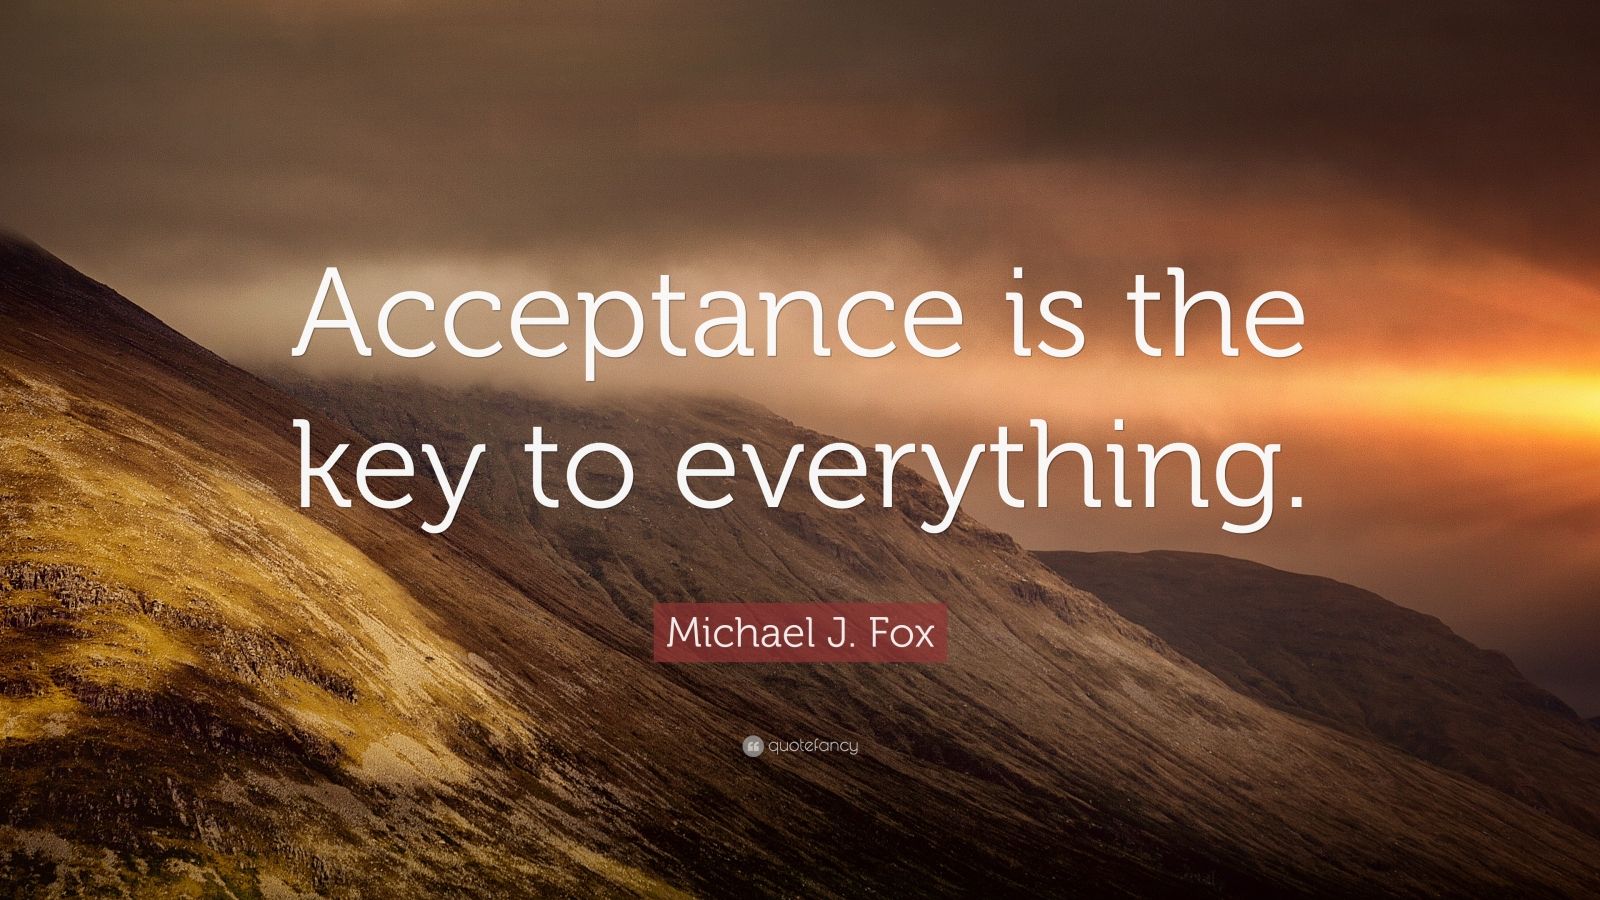 Michael J. Fox Quote: “Acceptance is the key to everything.” (7 ...